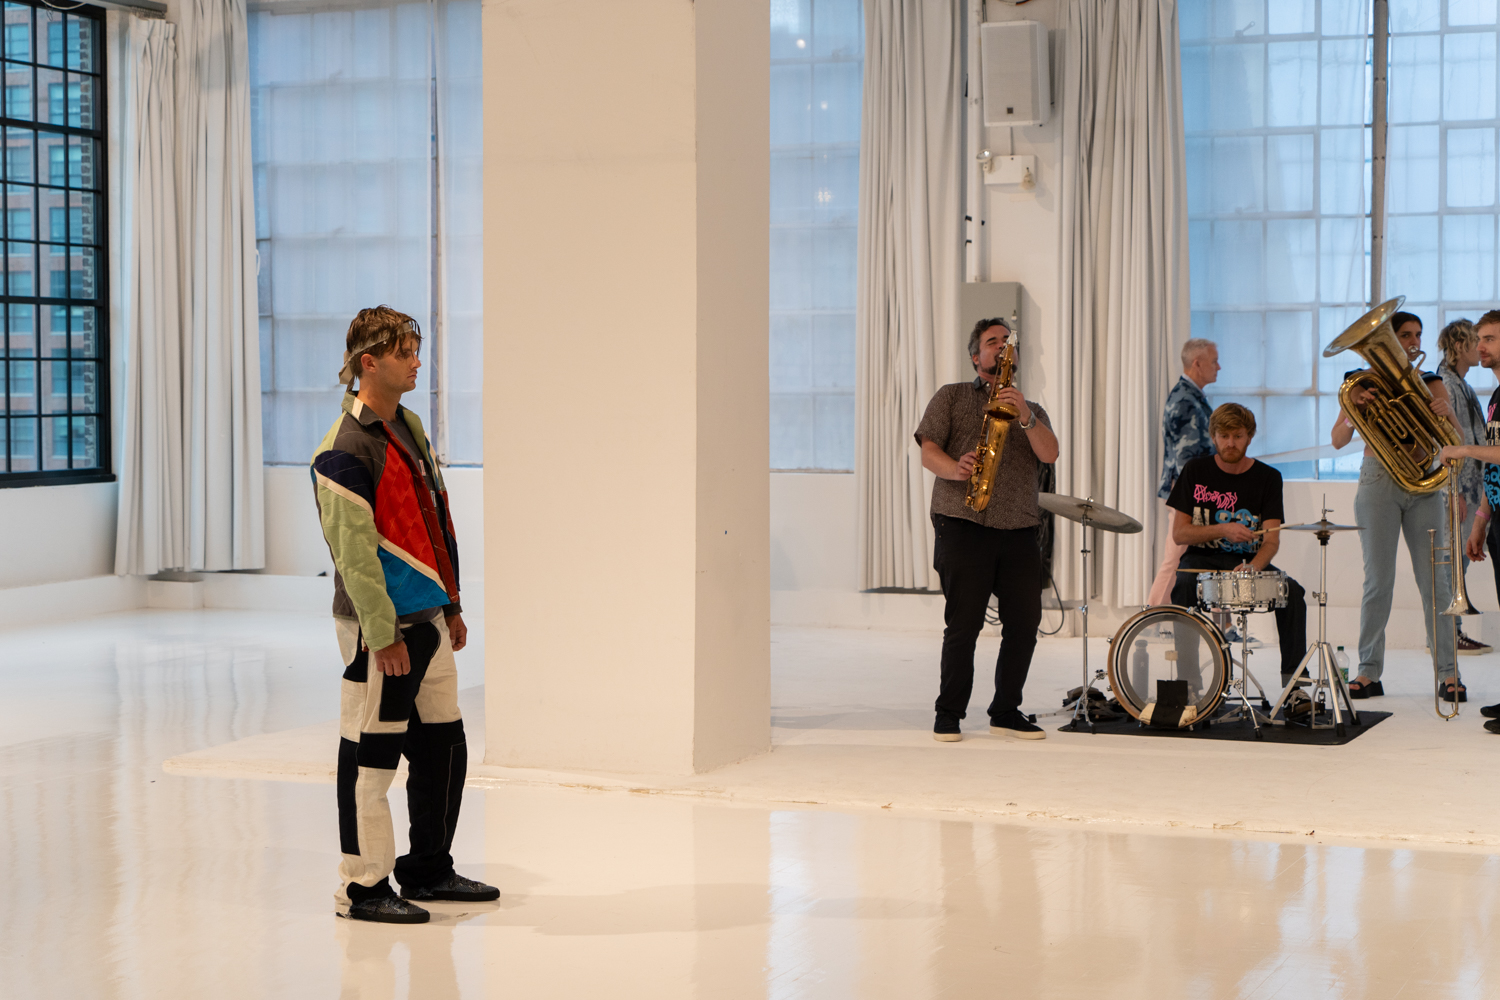 A model poses in the middle of a fashion showroom with white walls and floors and a band is playing. They are wearing clothing from the brand Raleigh Workshop.